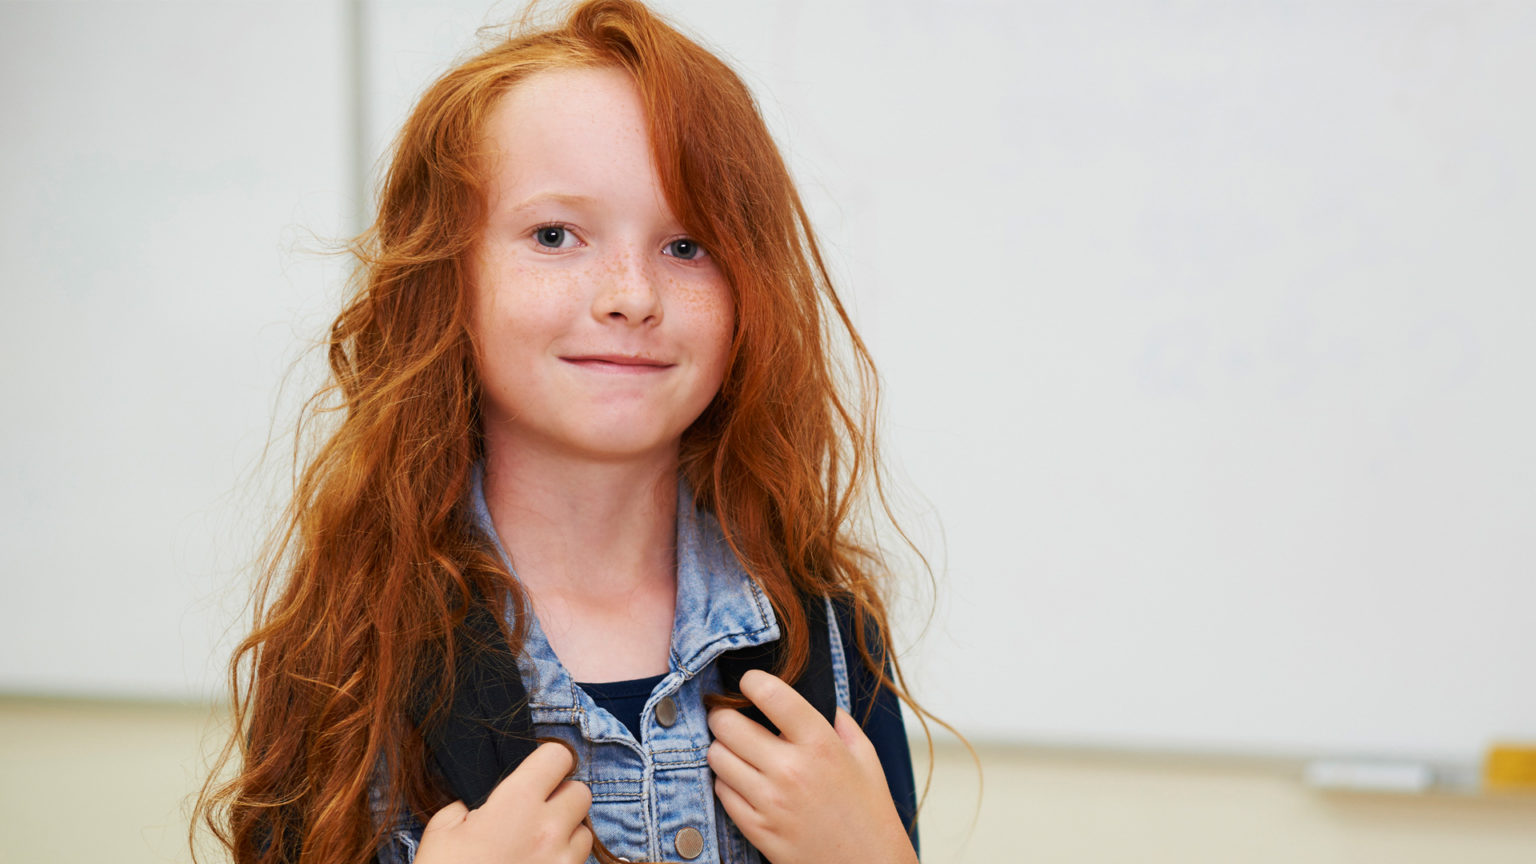 Red head girl going back to school with backpack in the classroom